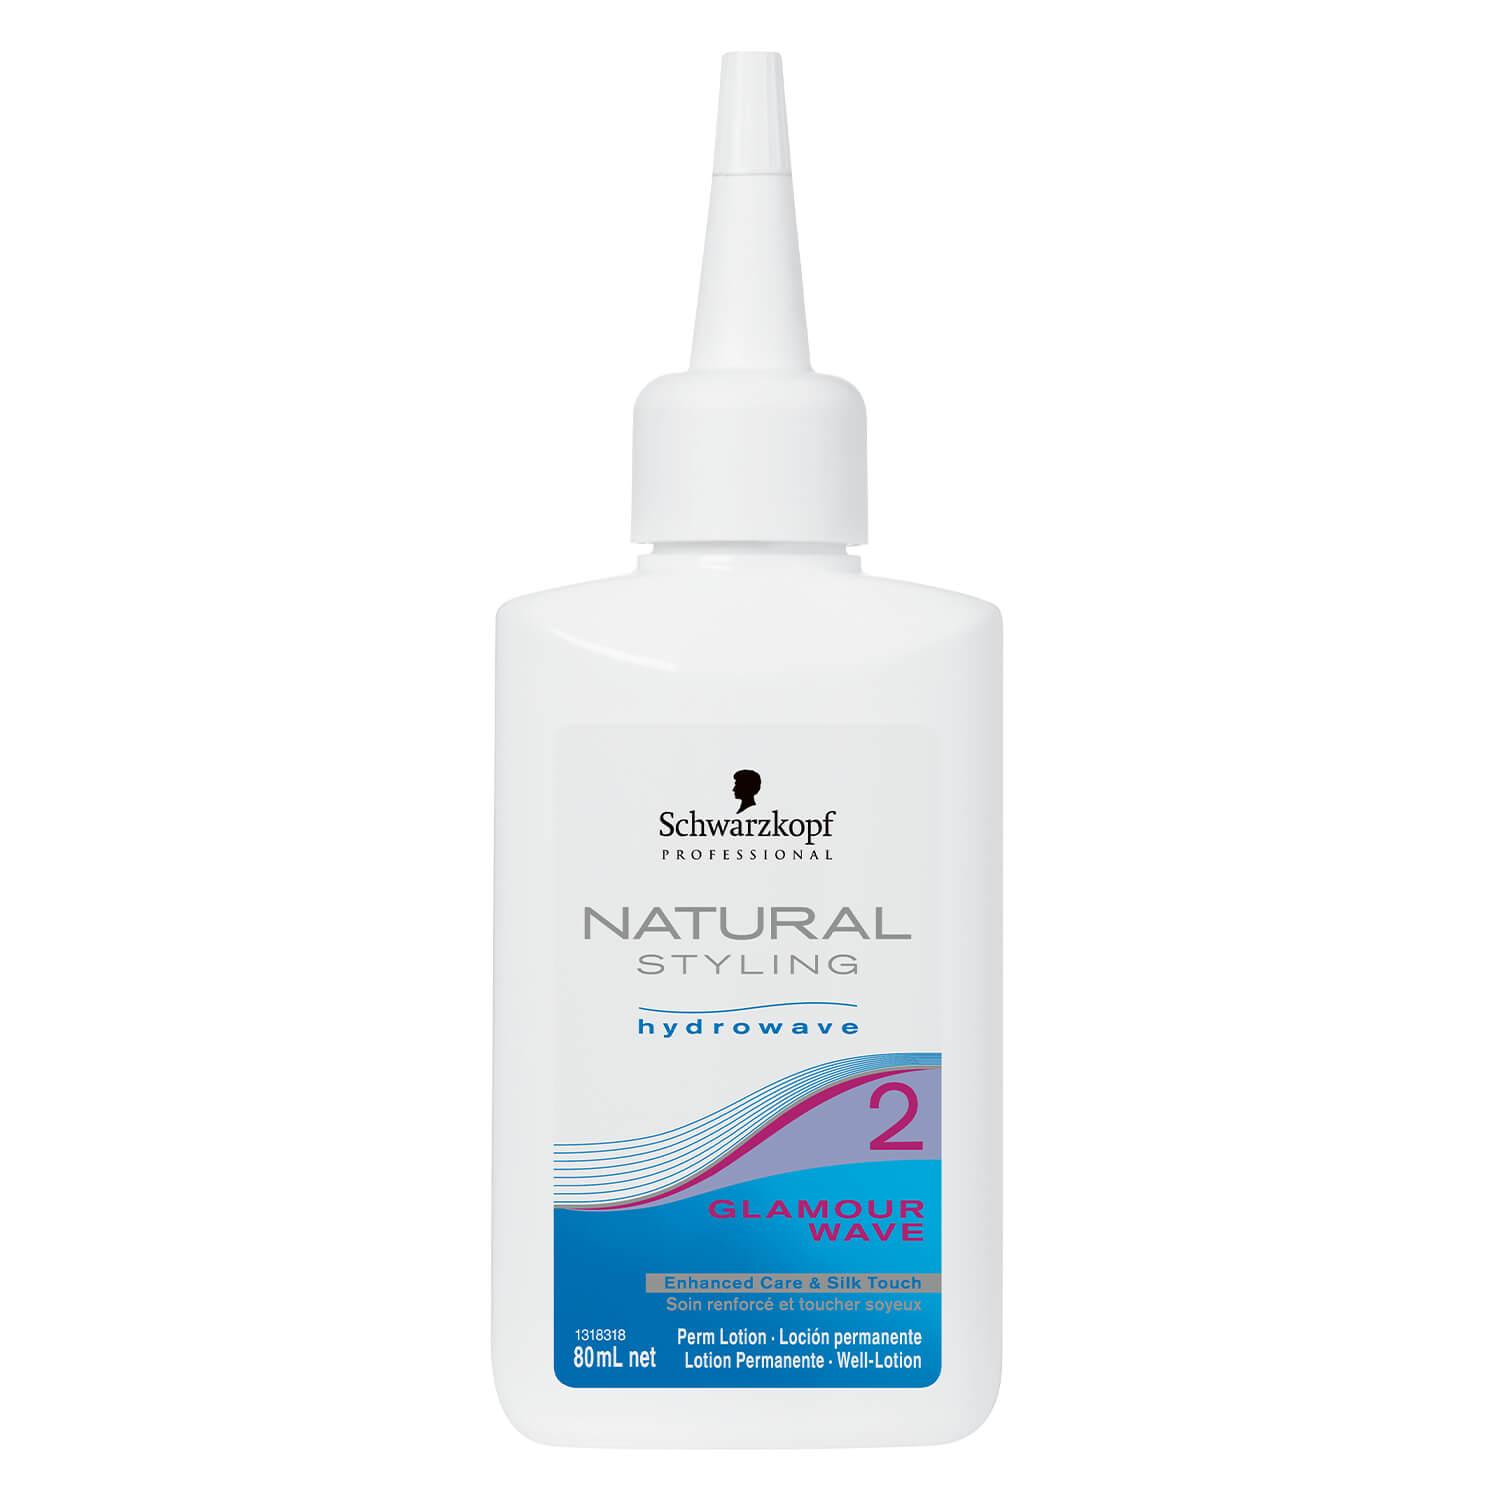 Natural Styling - Hydrowave Glamour Wave 2 Perm Lotion